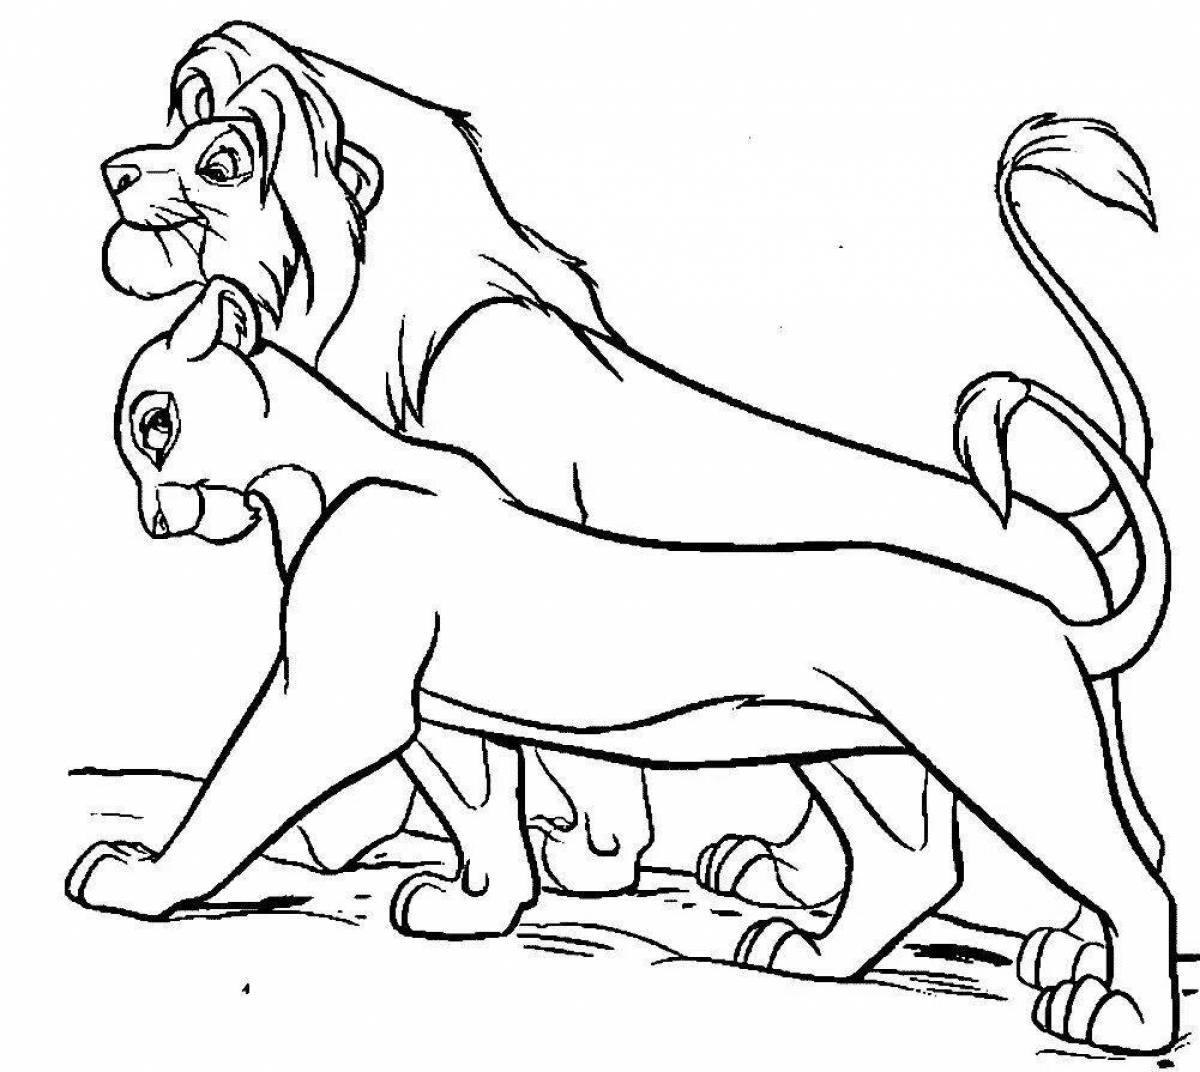 Lion king palace coloring page